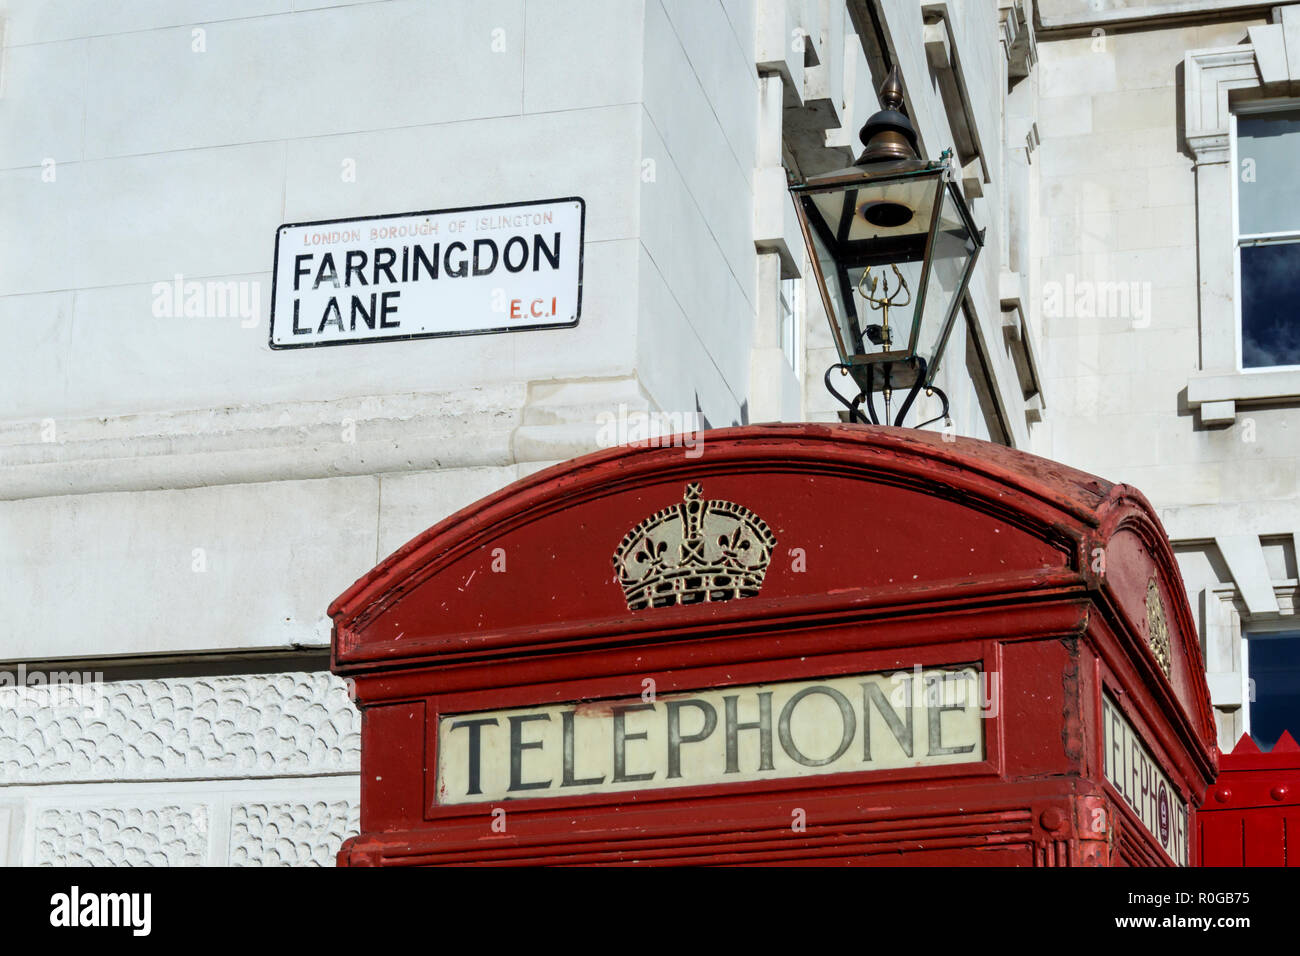 A street sign for Farringdon Lane in London. Stock Photo